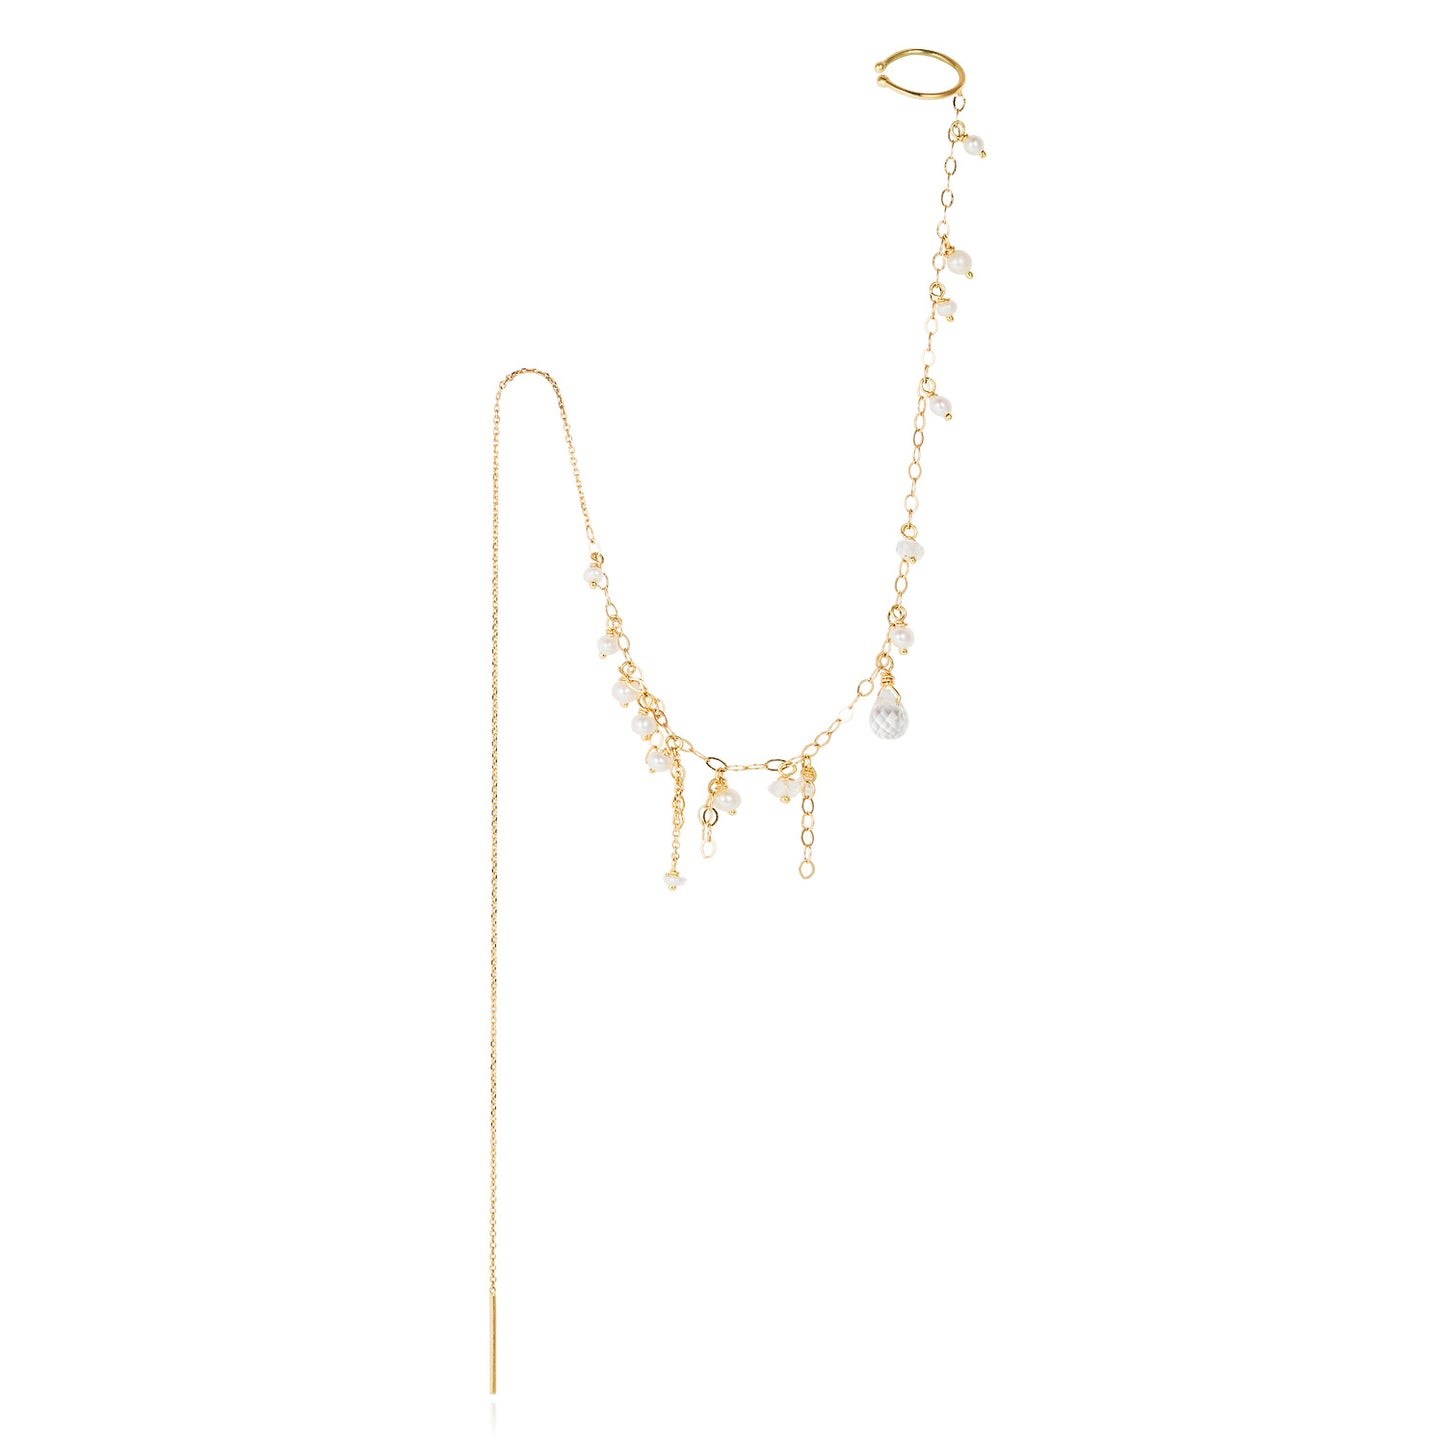 18ct yellow thread through long chain earring with ear cuff with seed Pearl and Moonstone